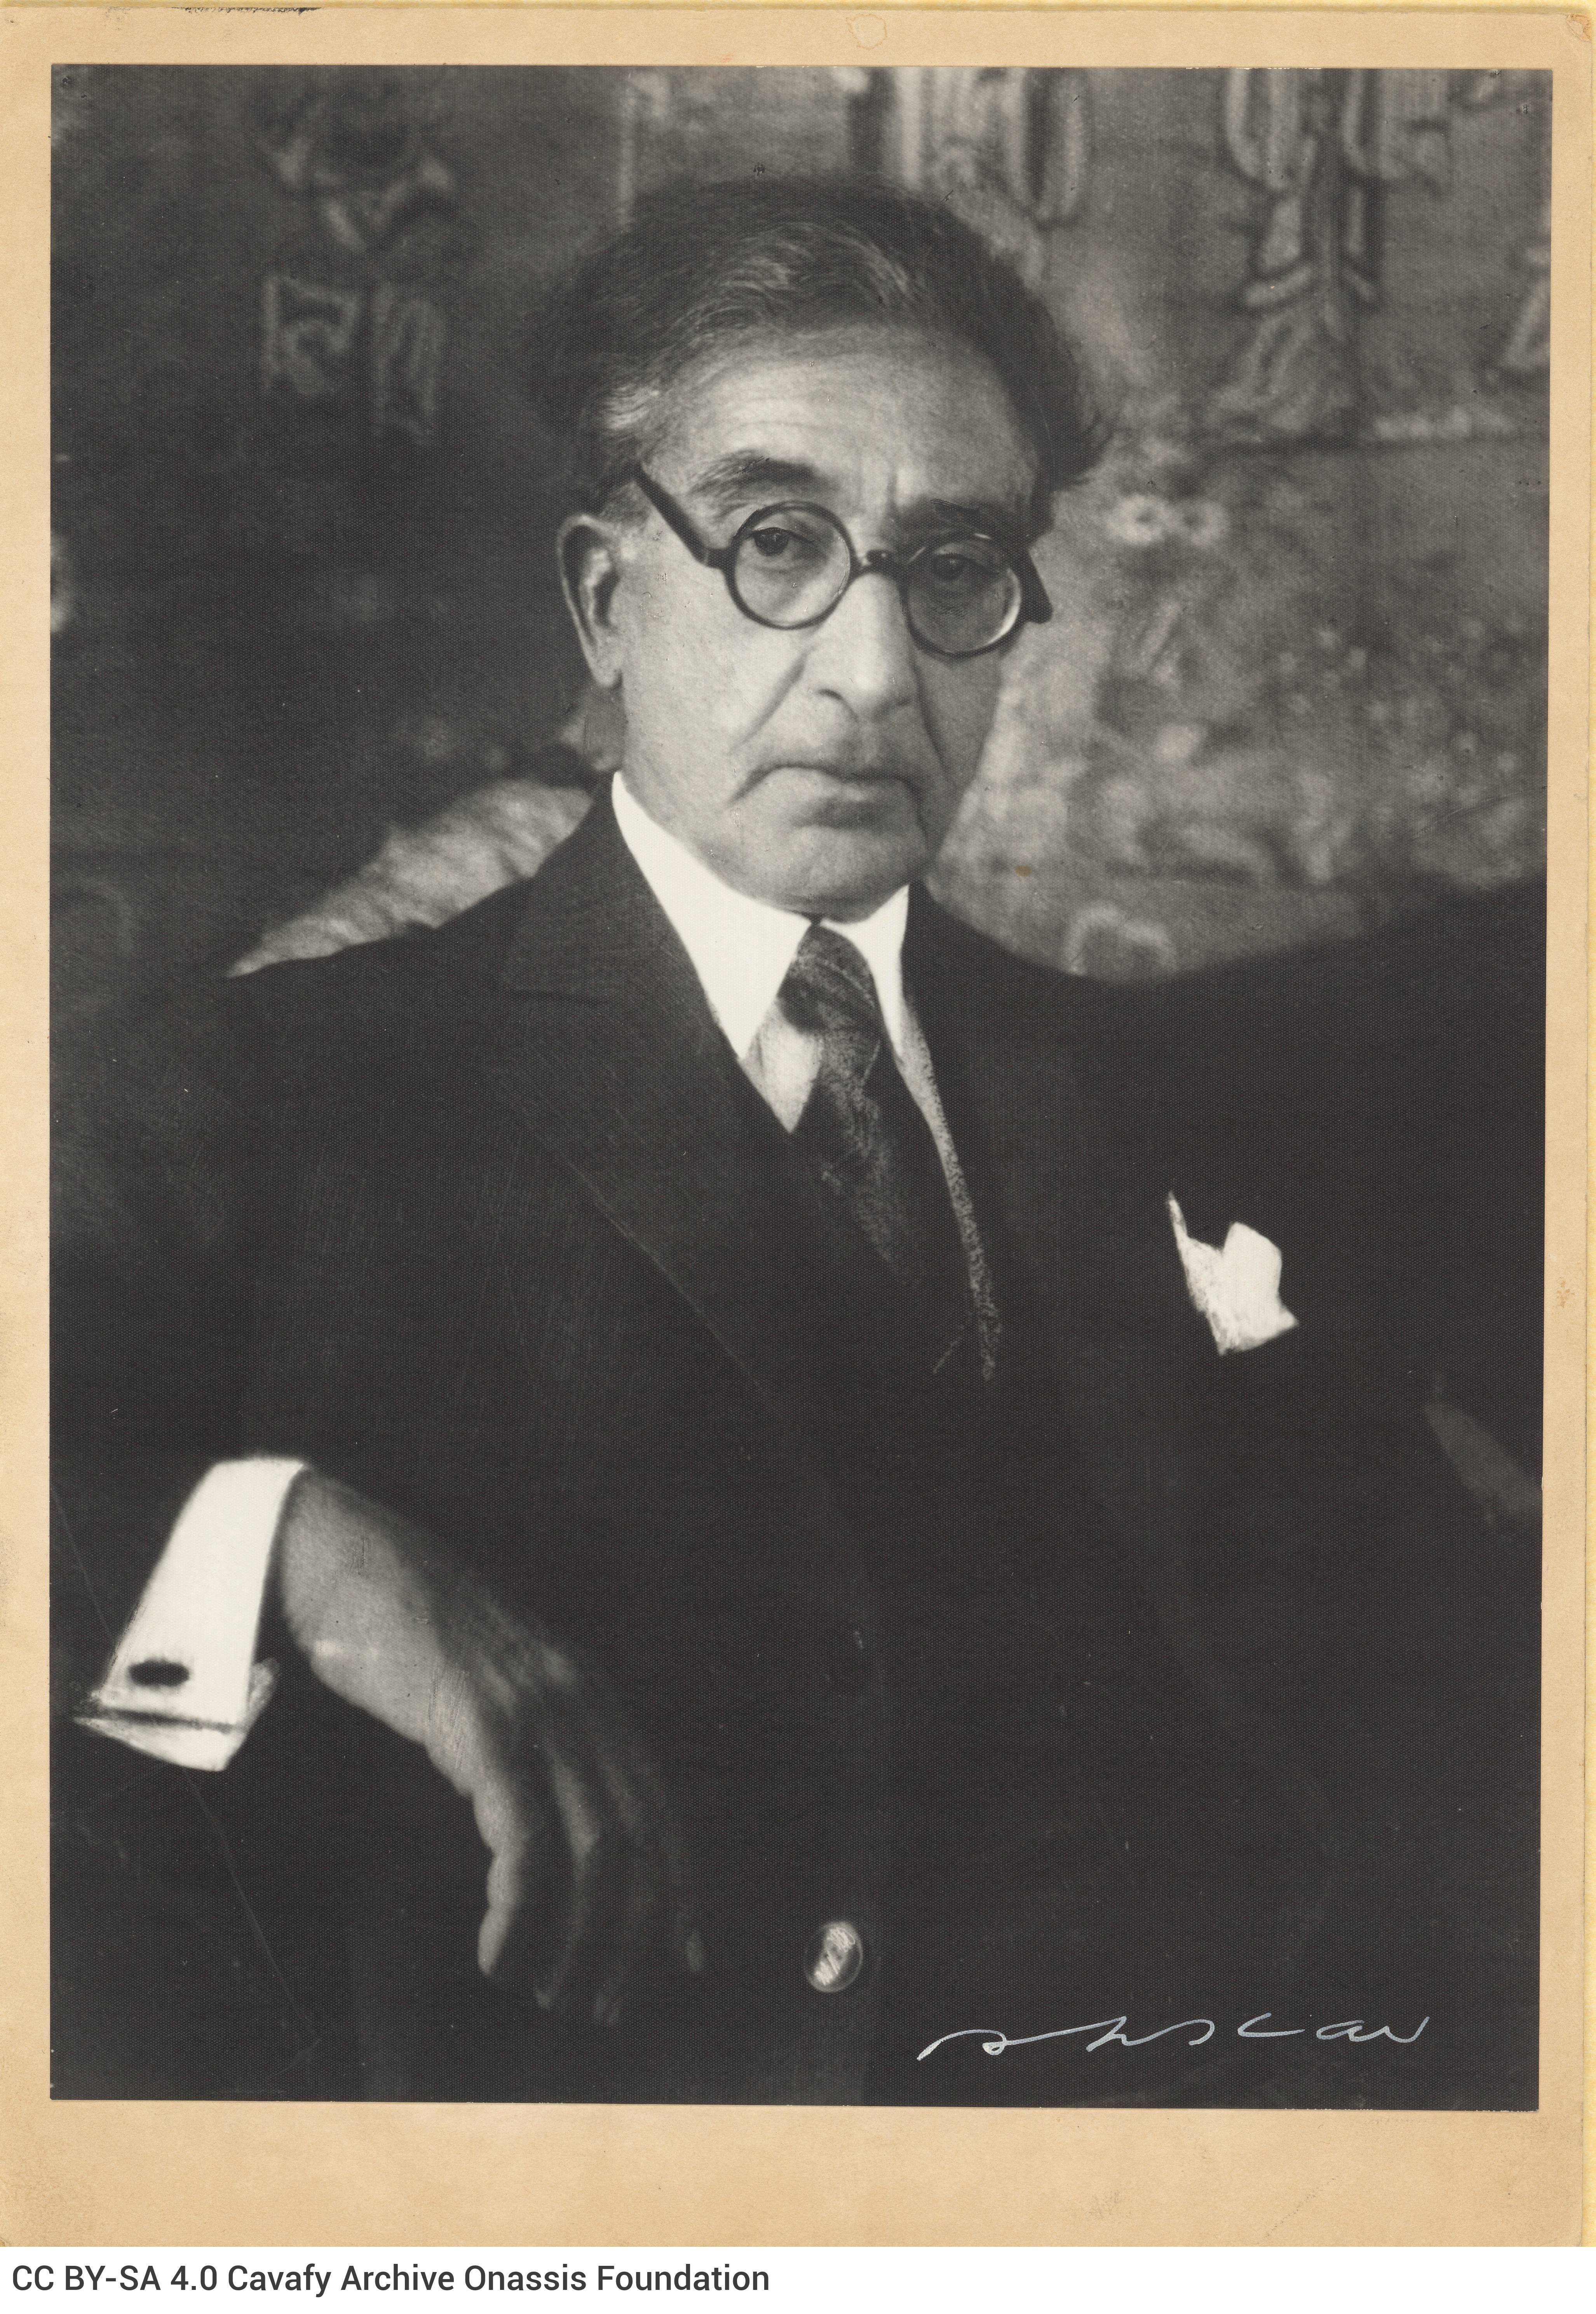 Enlargement of a photograph of Cavafy in his apartment. The photograph had originally been taken by the photographer Racine i